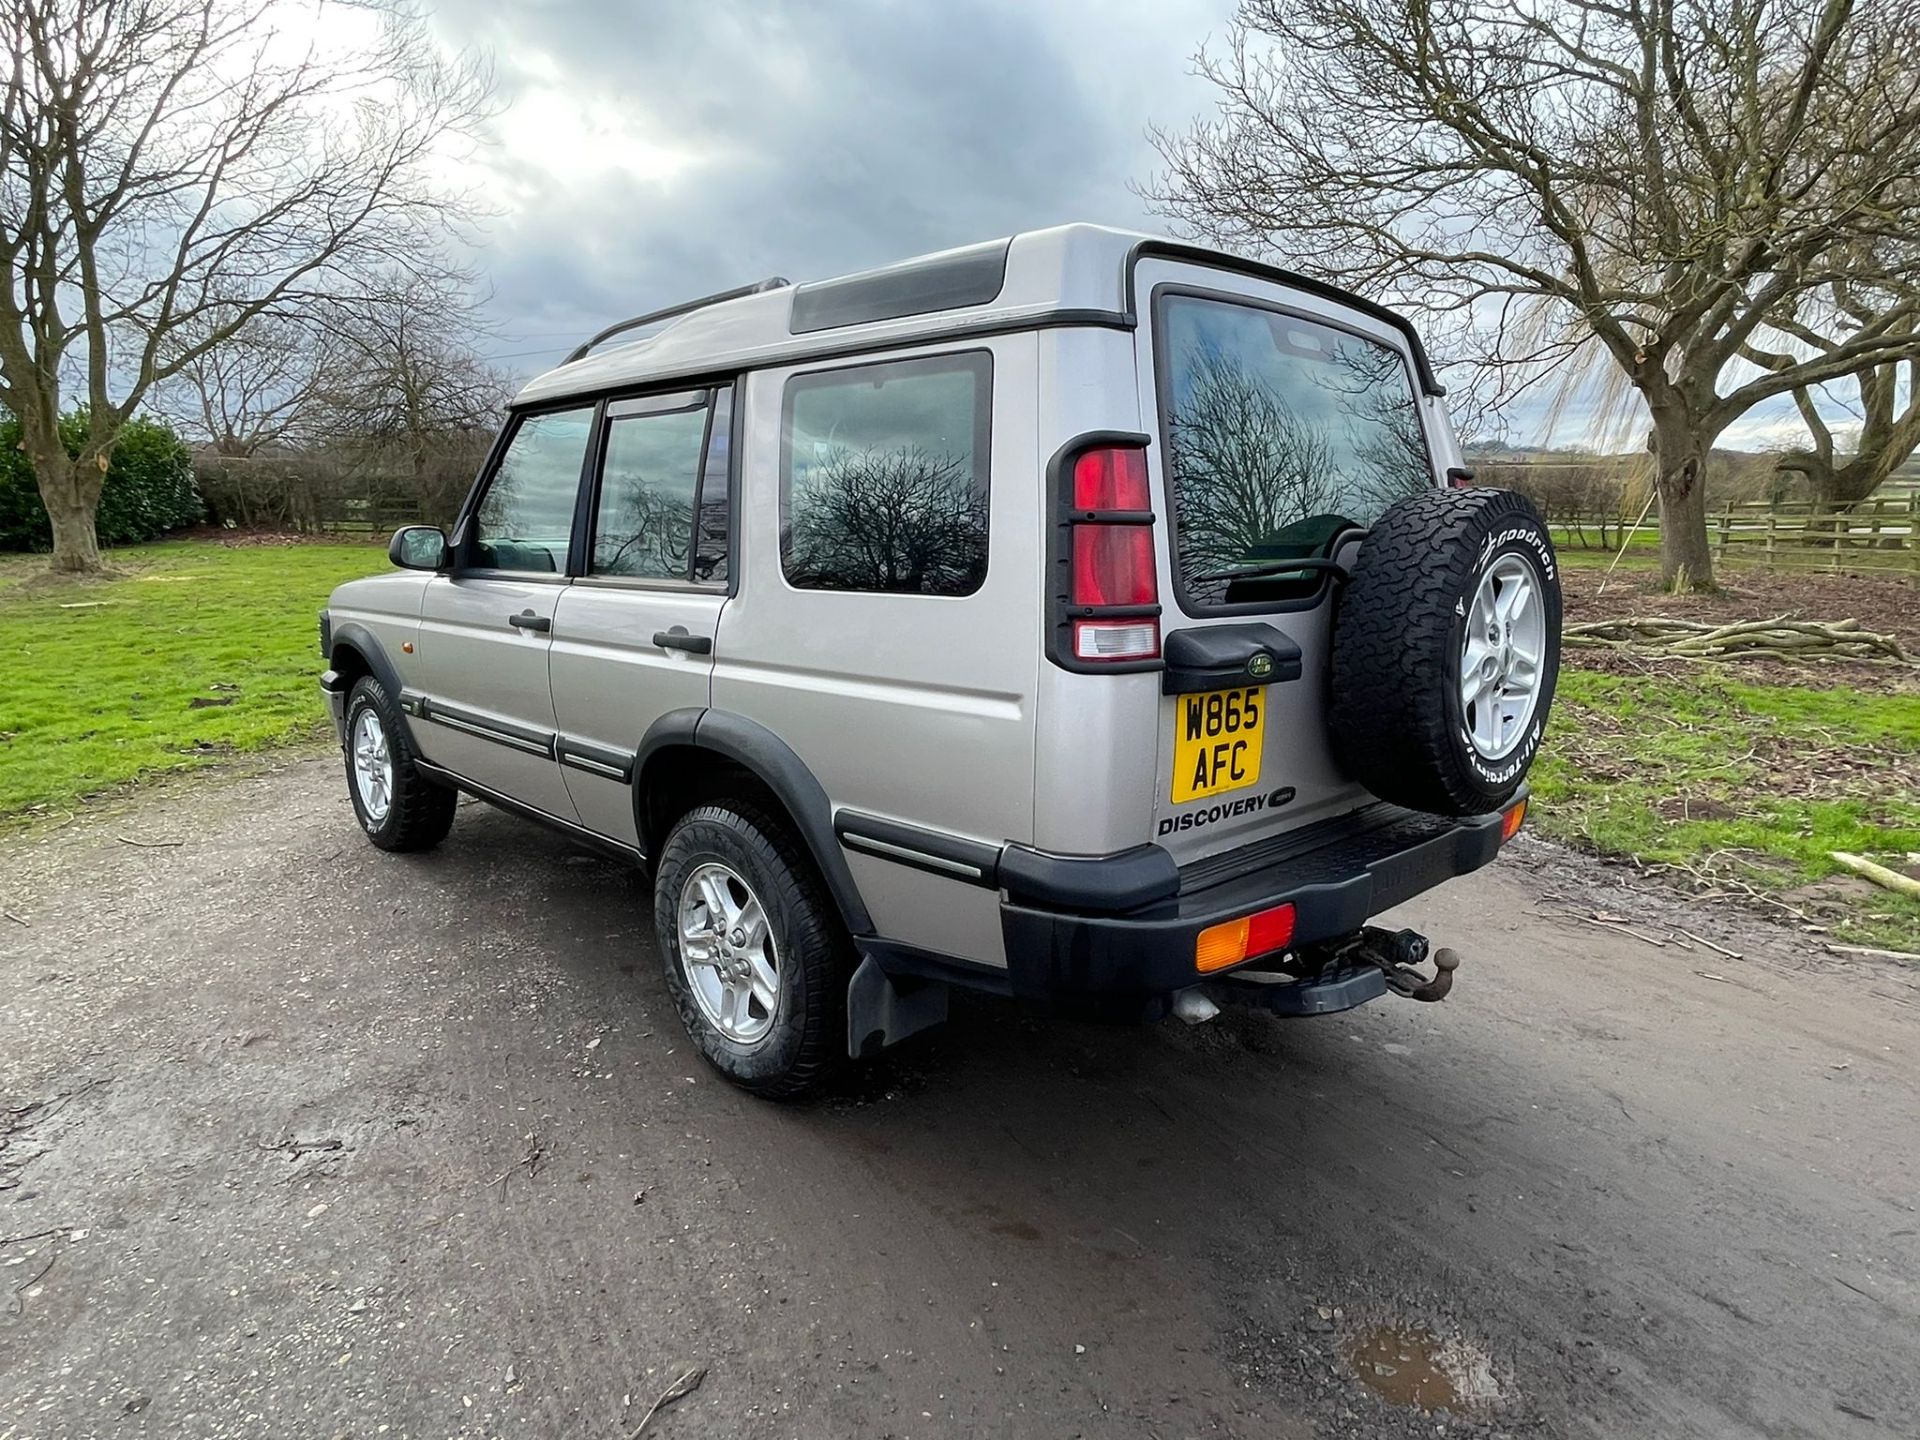 2000 LAND ROVER DISCOVERY TD5 ES SILVER ESTATE, 271,031 MILES, GALVANISED CHASSIS *NO VAT* - Image 5 of 17